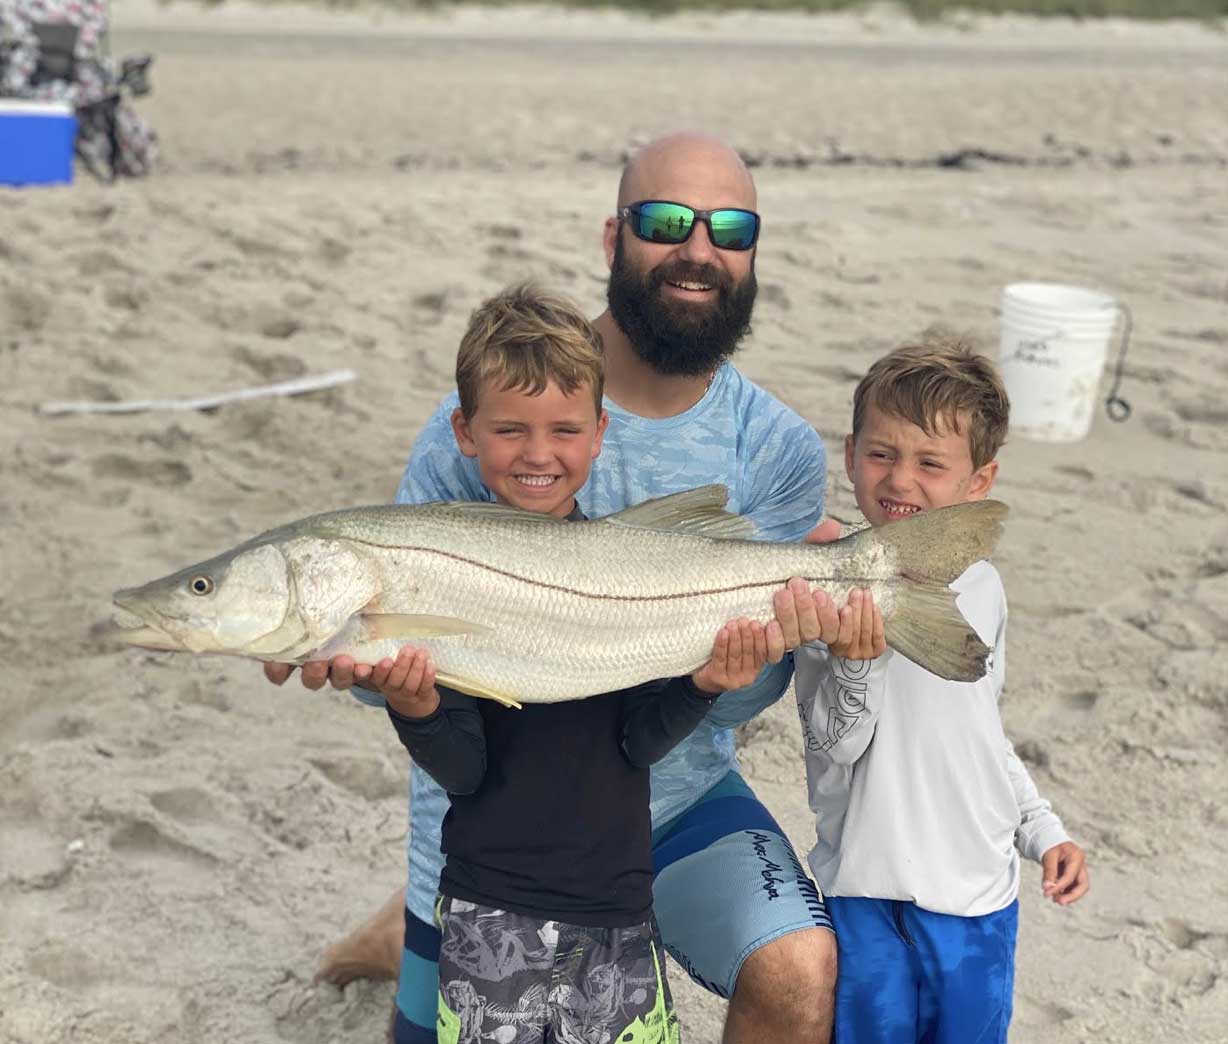 snook fishing in the surf